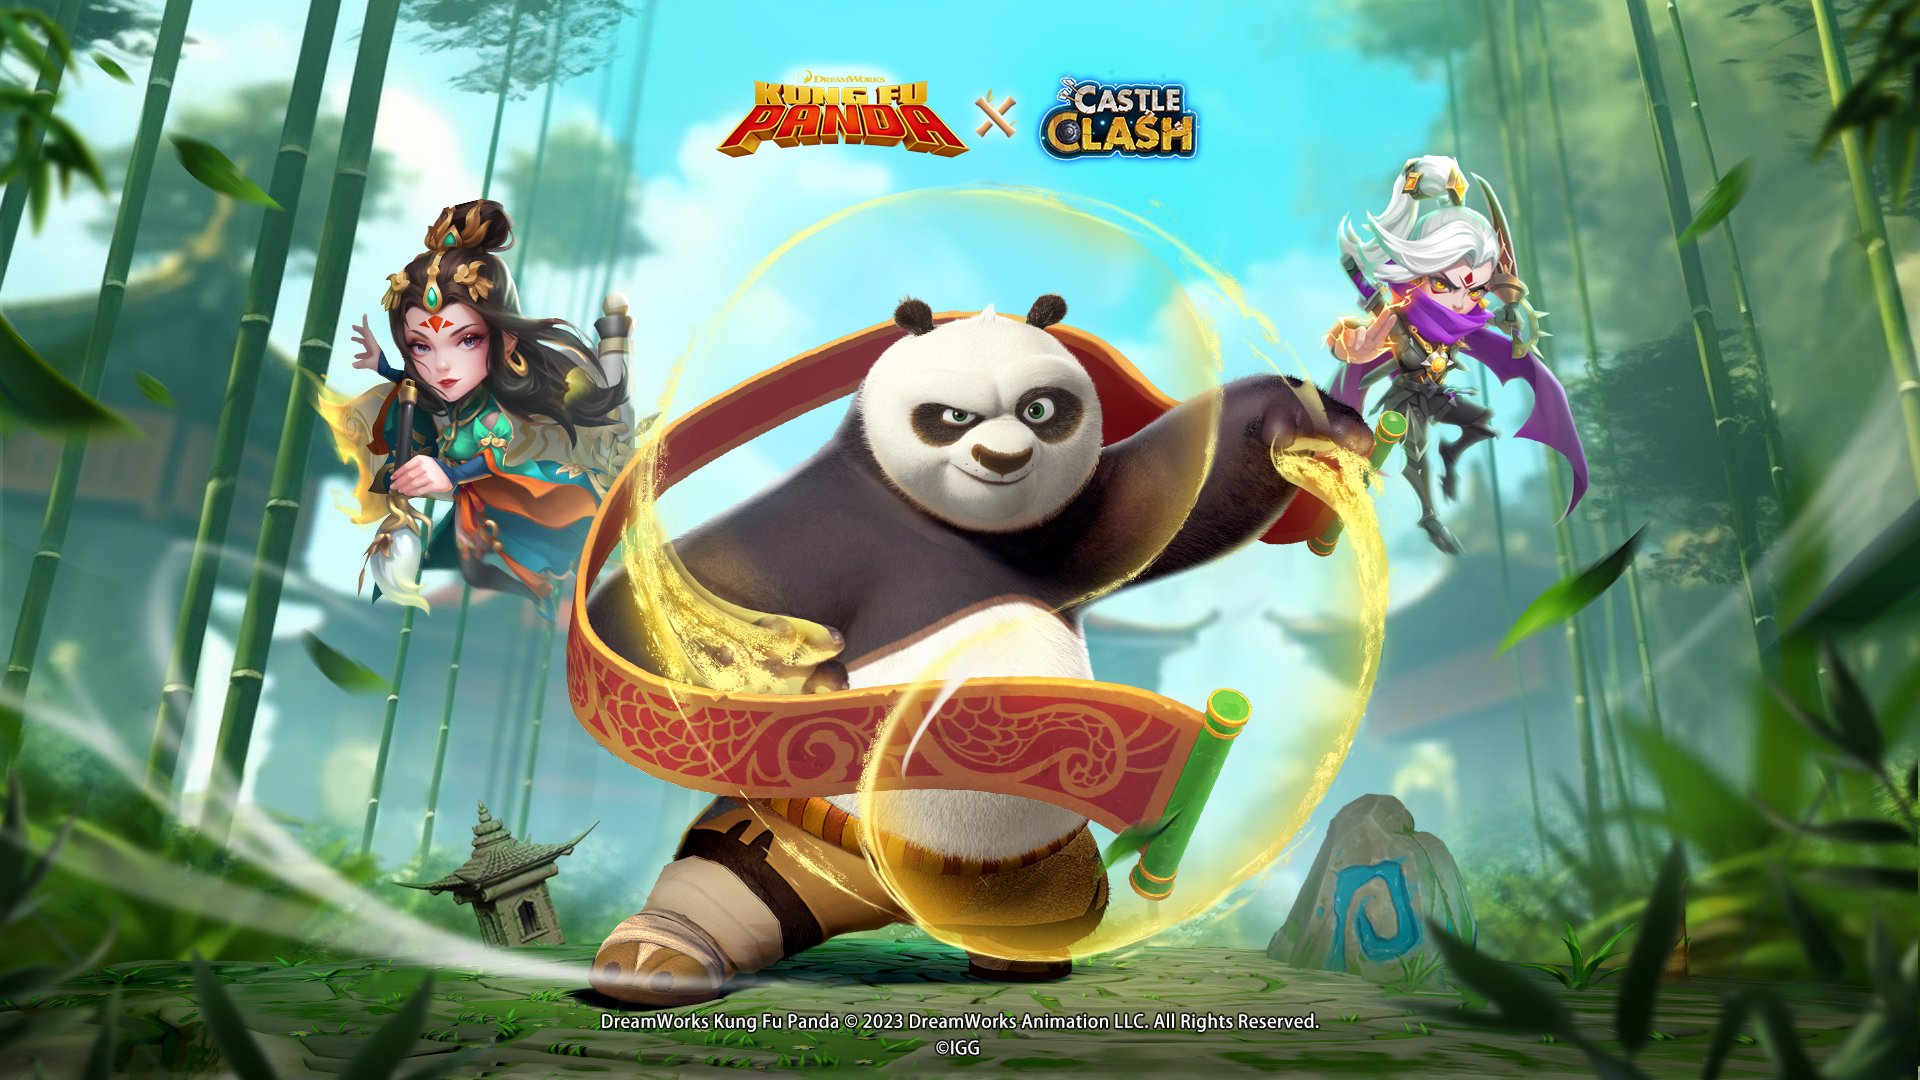 Castle Clash x Kung Fu Panda Is Here All Month, With Rewards and Prizes up for Grabs